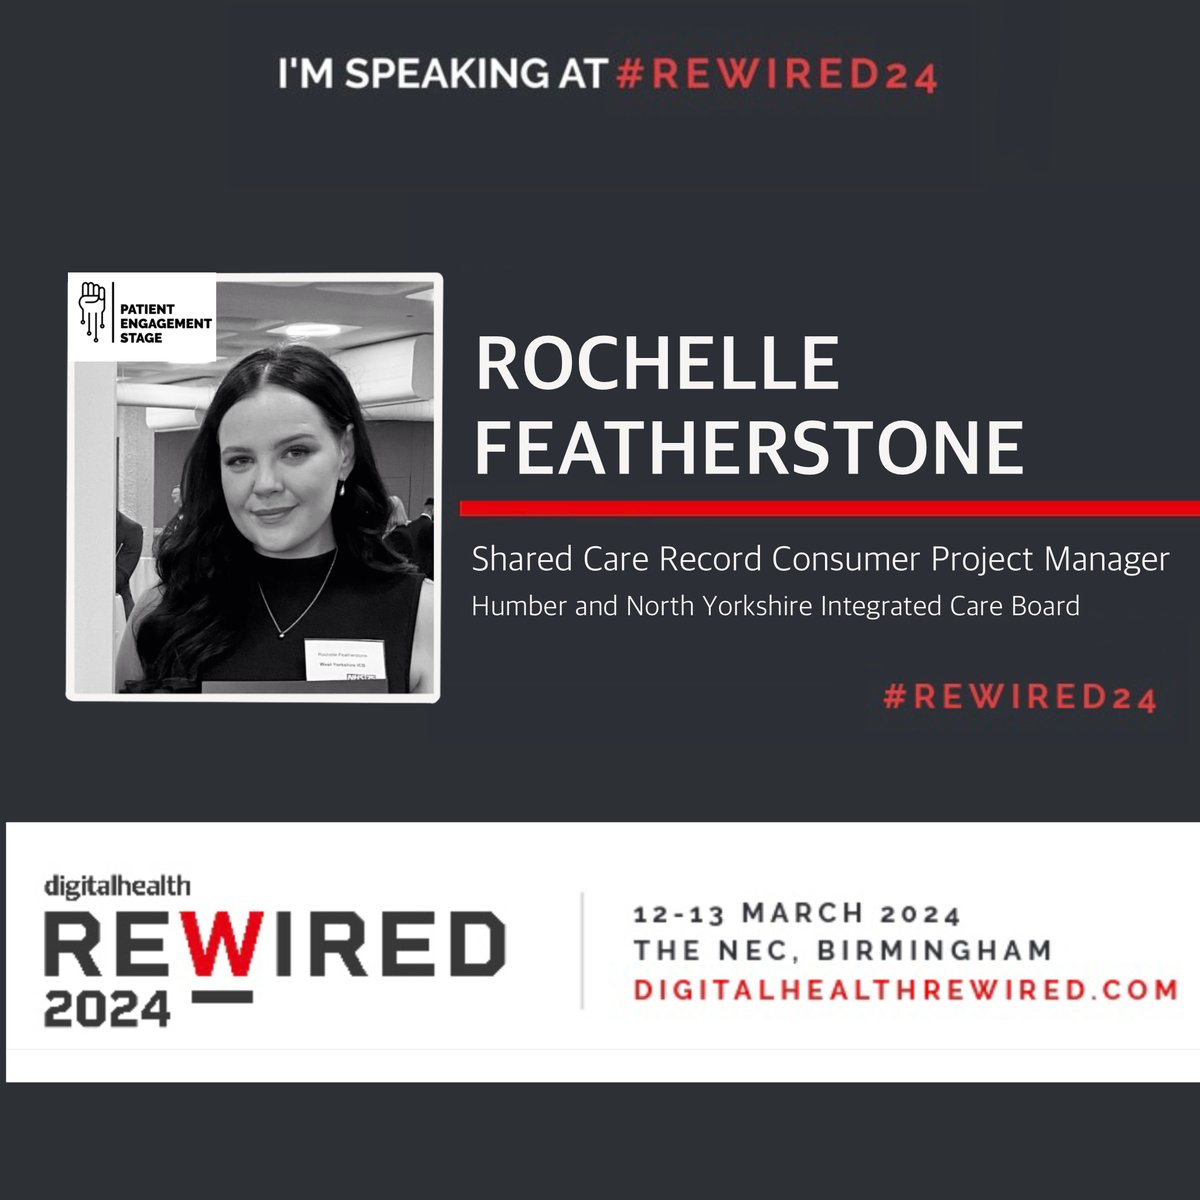 Delighted to be speaking at @DHRewired again on T1D tech. I have some insightful, inspiring and life changing patient stories and quotes to go through, along with sharing this session with other inspiring patient focused voices. See you there! #REWIRED24 #GBDoc